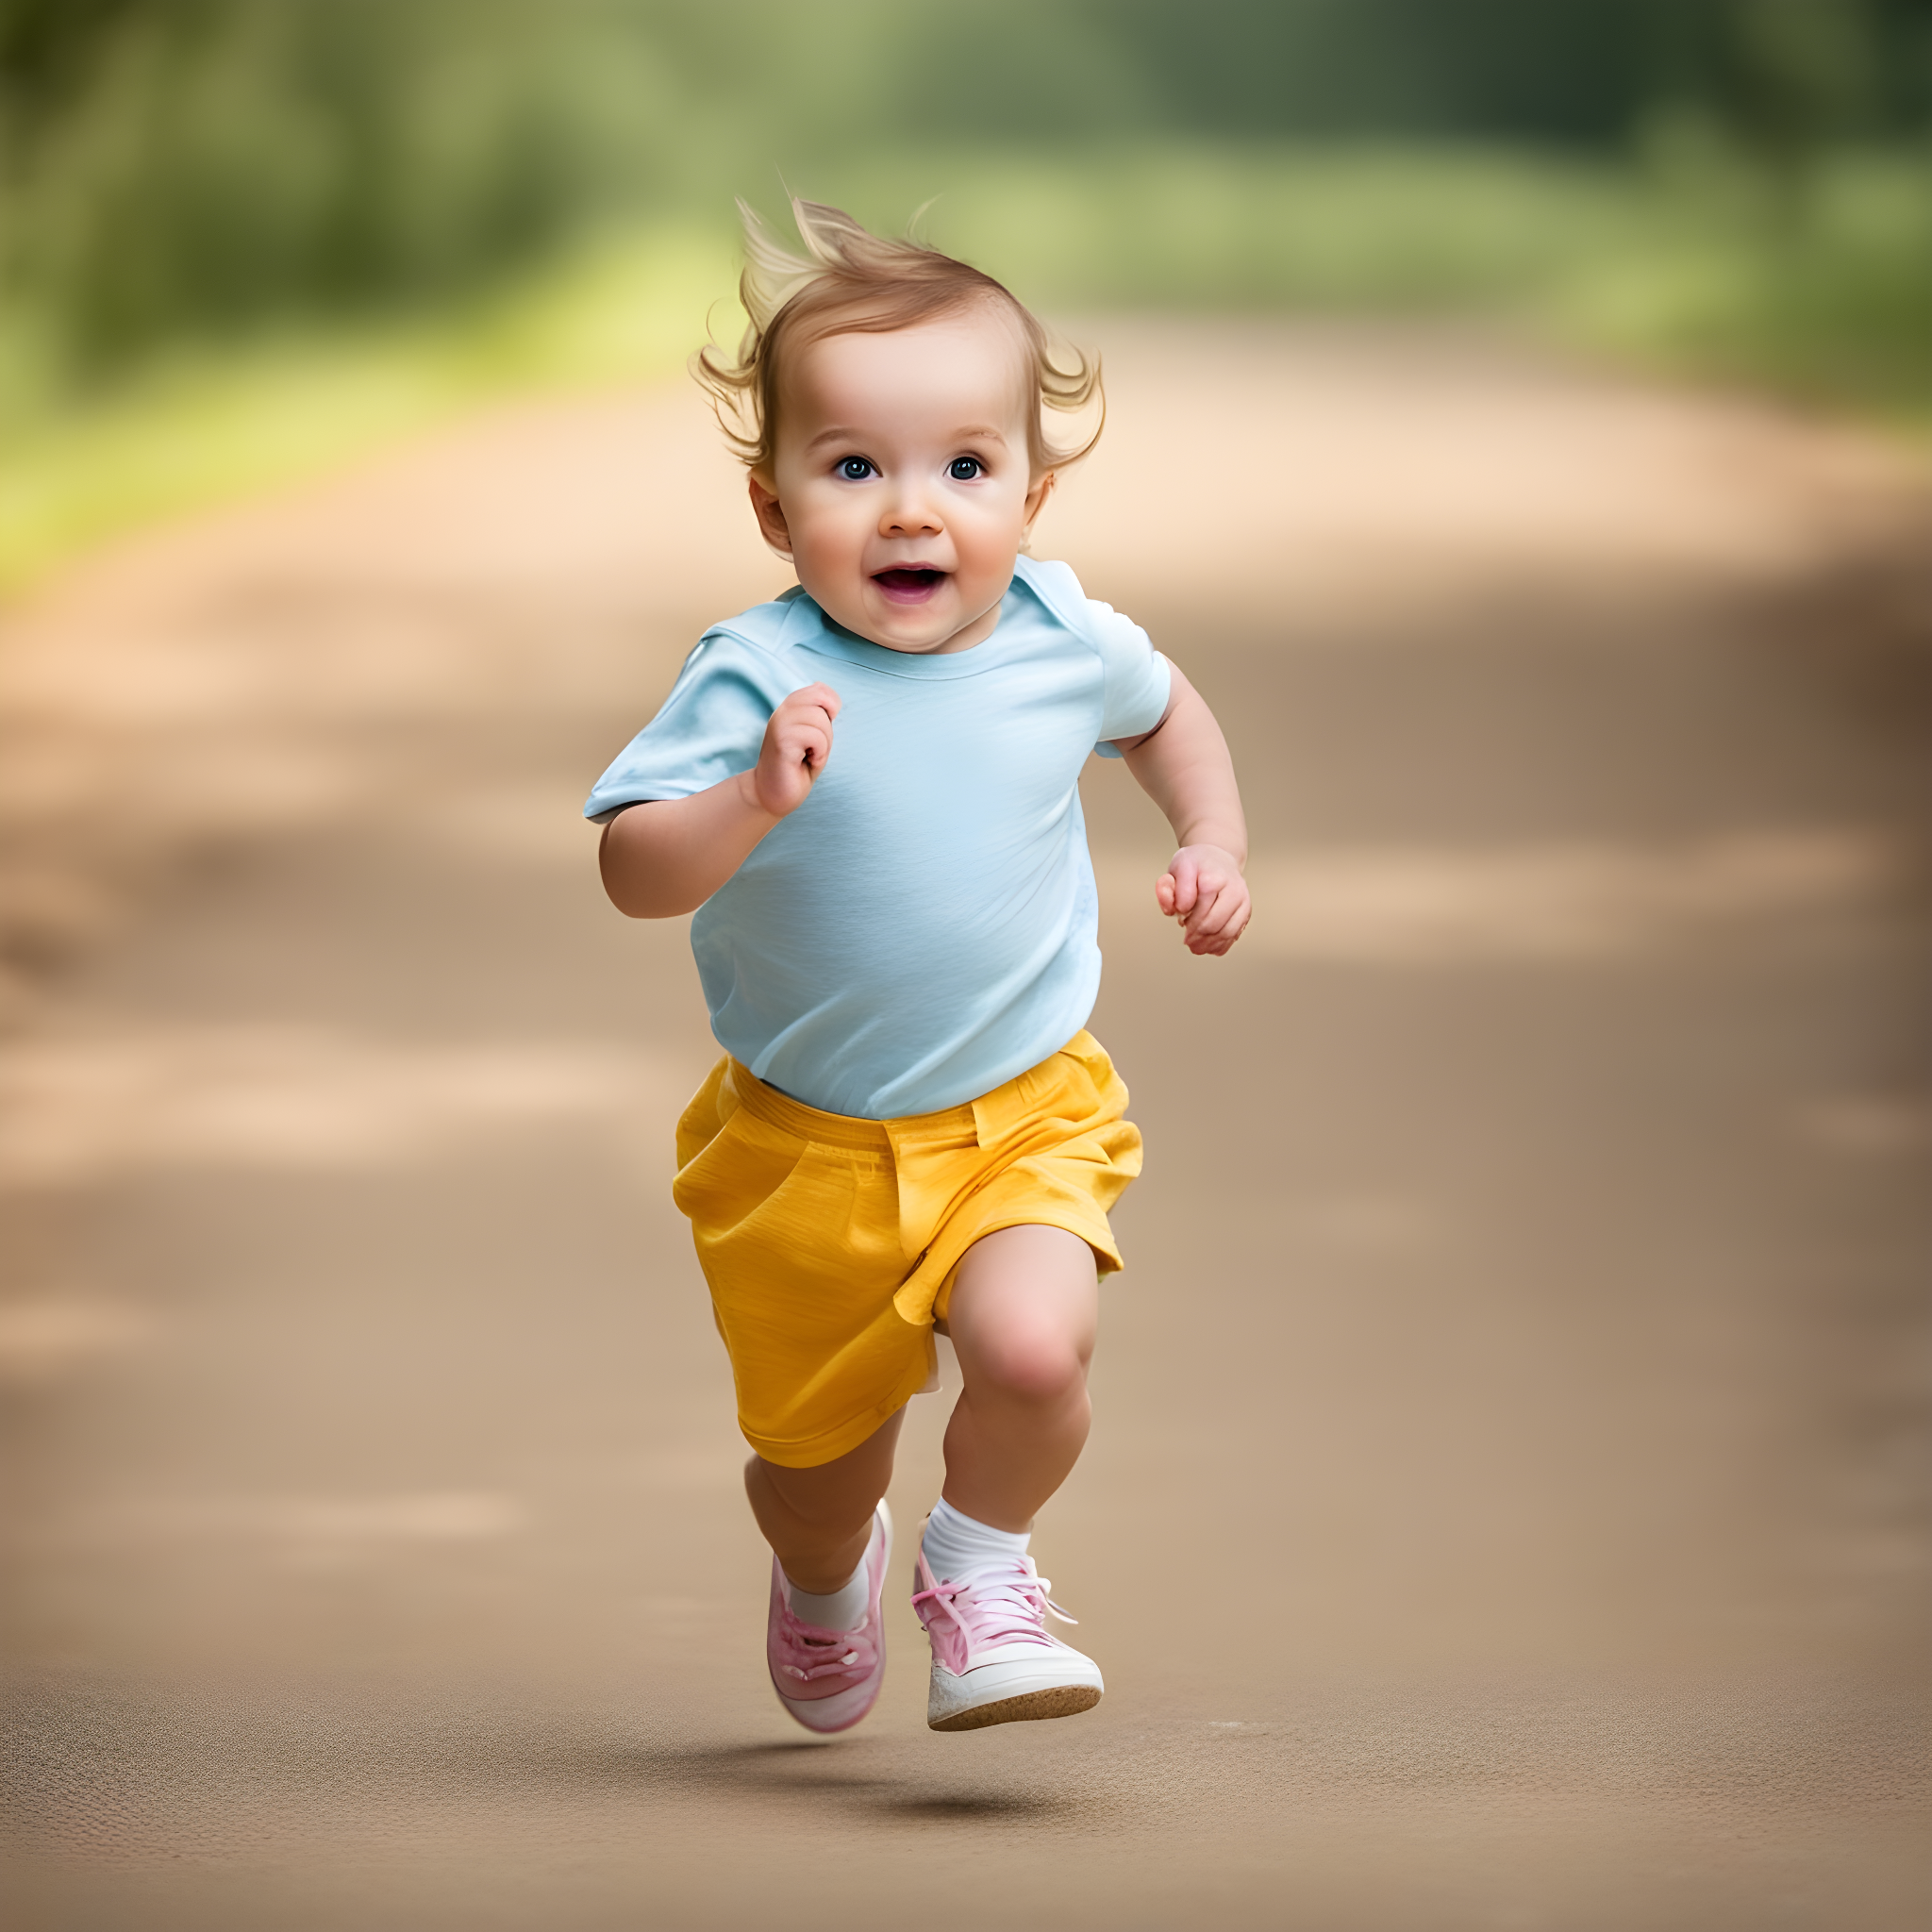 Baby's Mobility and Exploration Desire: A Normal Developmental Phase